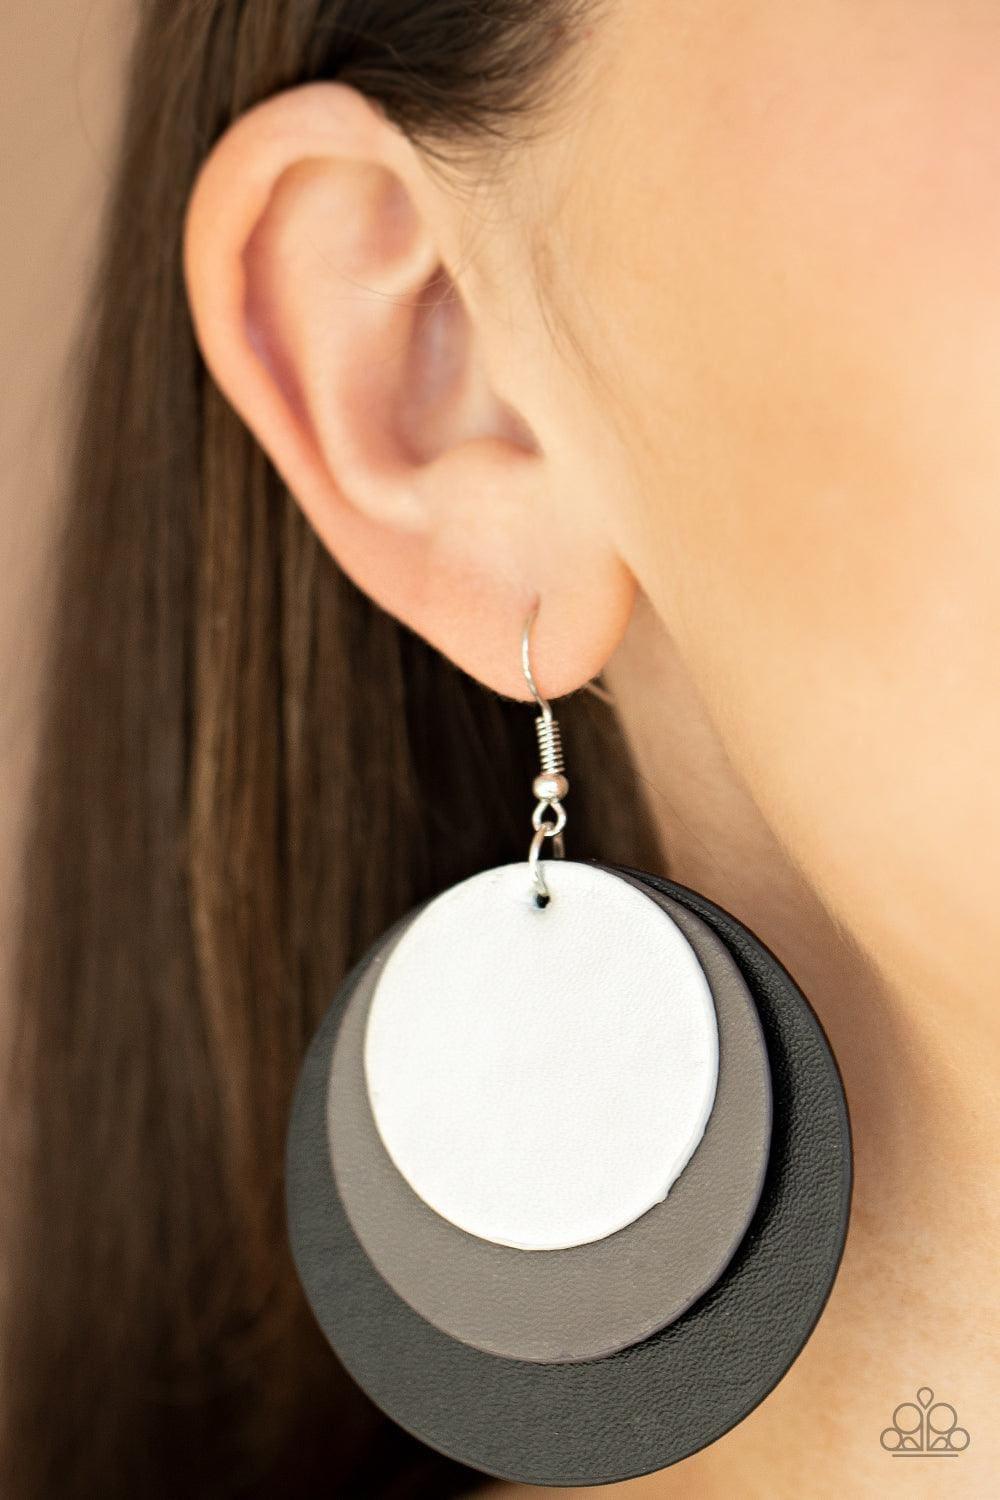 Paparazzi Accessories - Leather Forecast - Black Earrings - Bling by JessieK